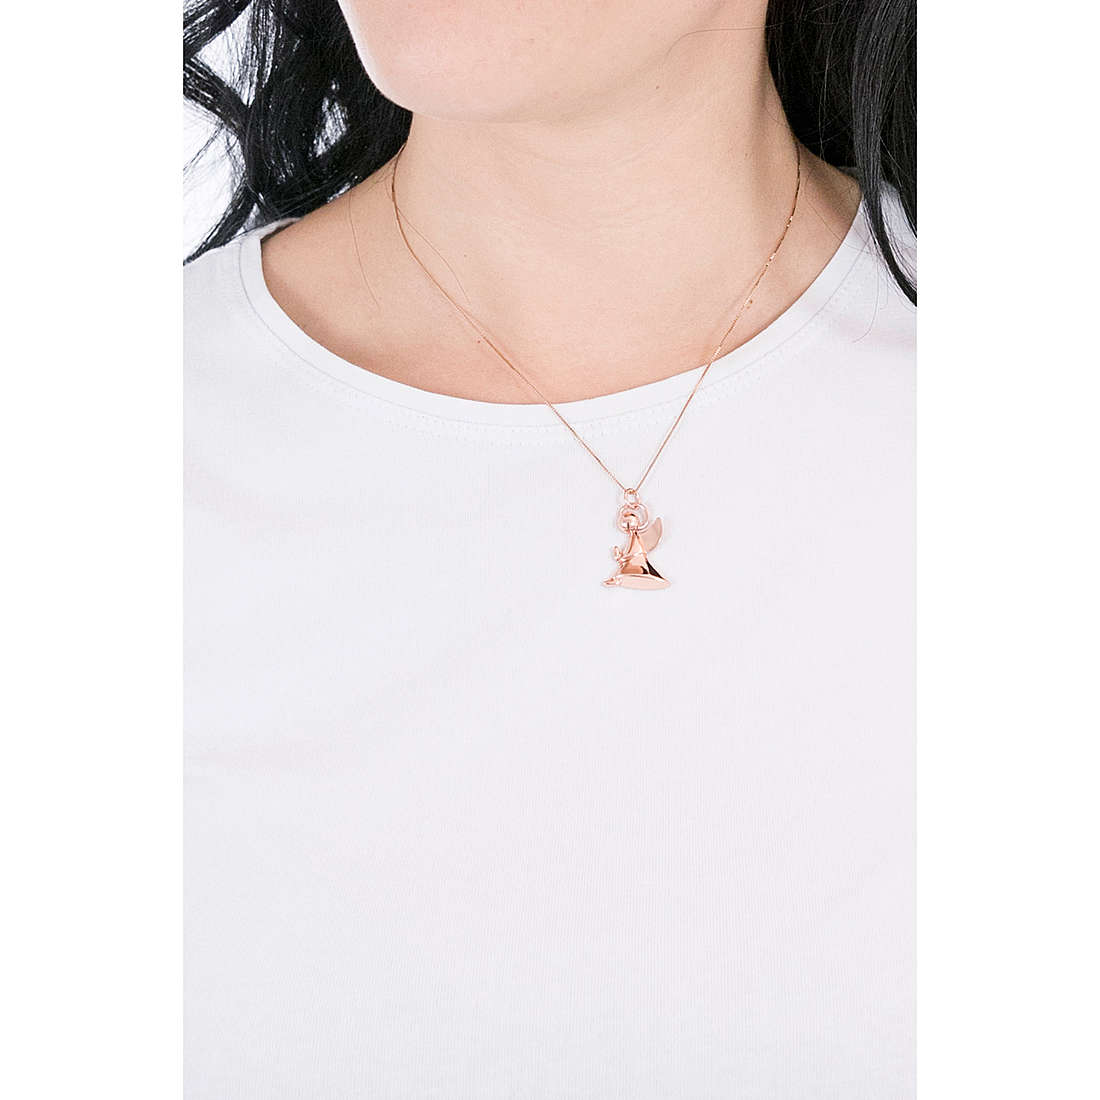 Amen necklaces Naughty&Nice woman A4R wearing